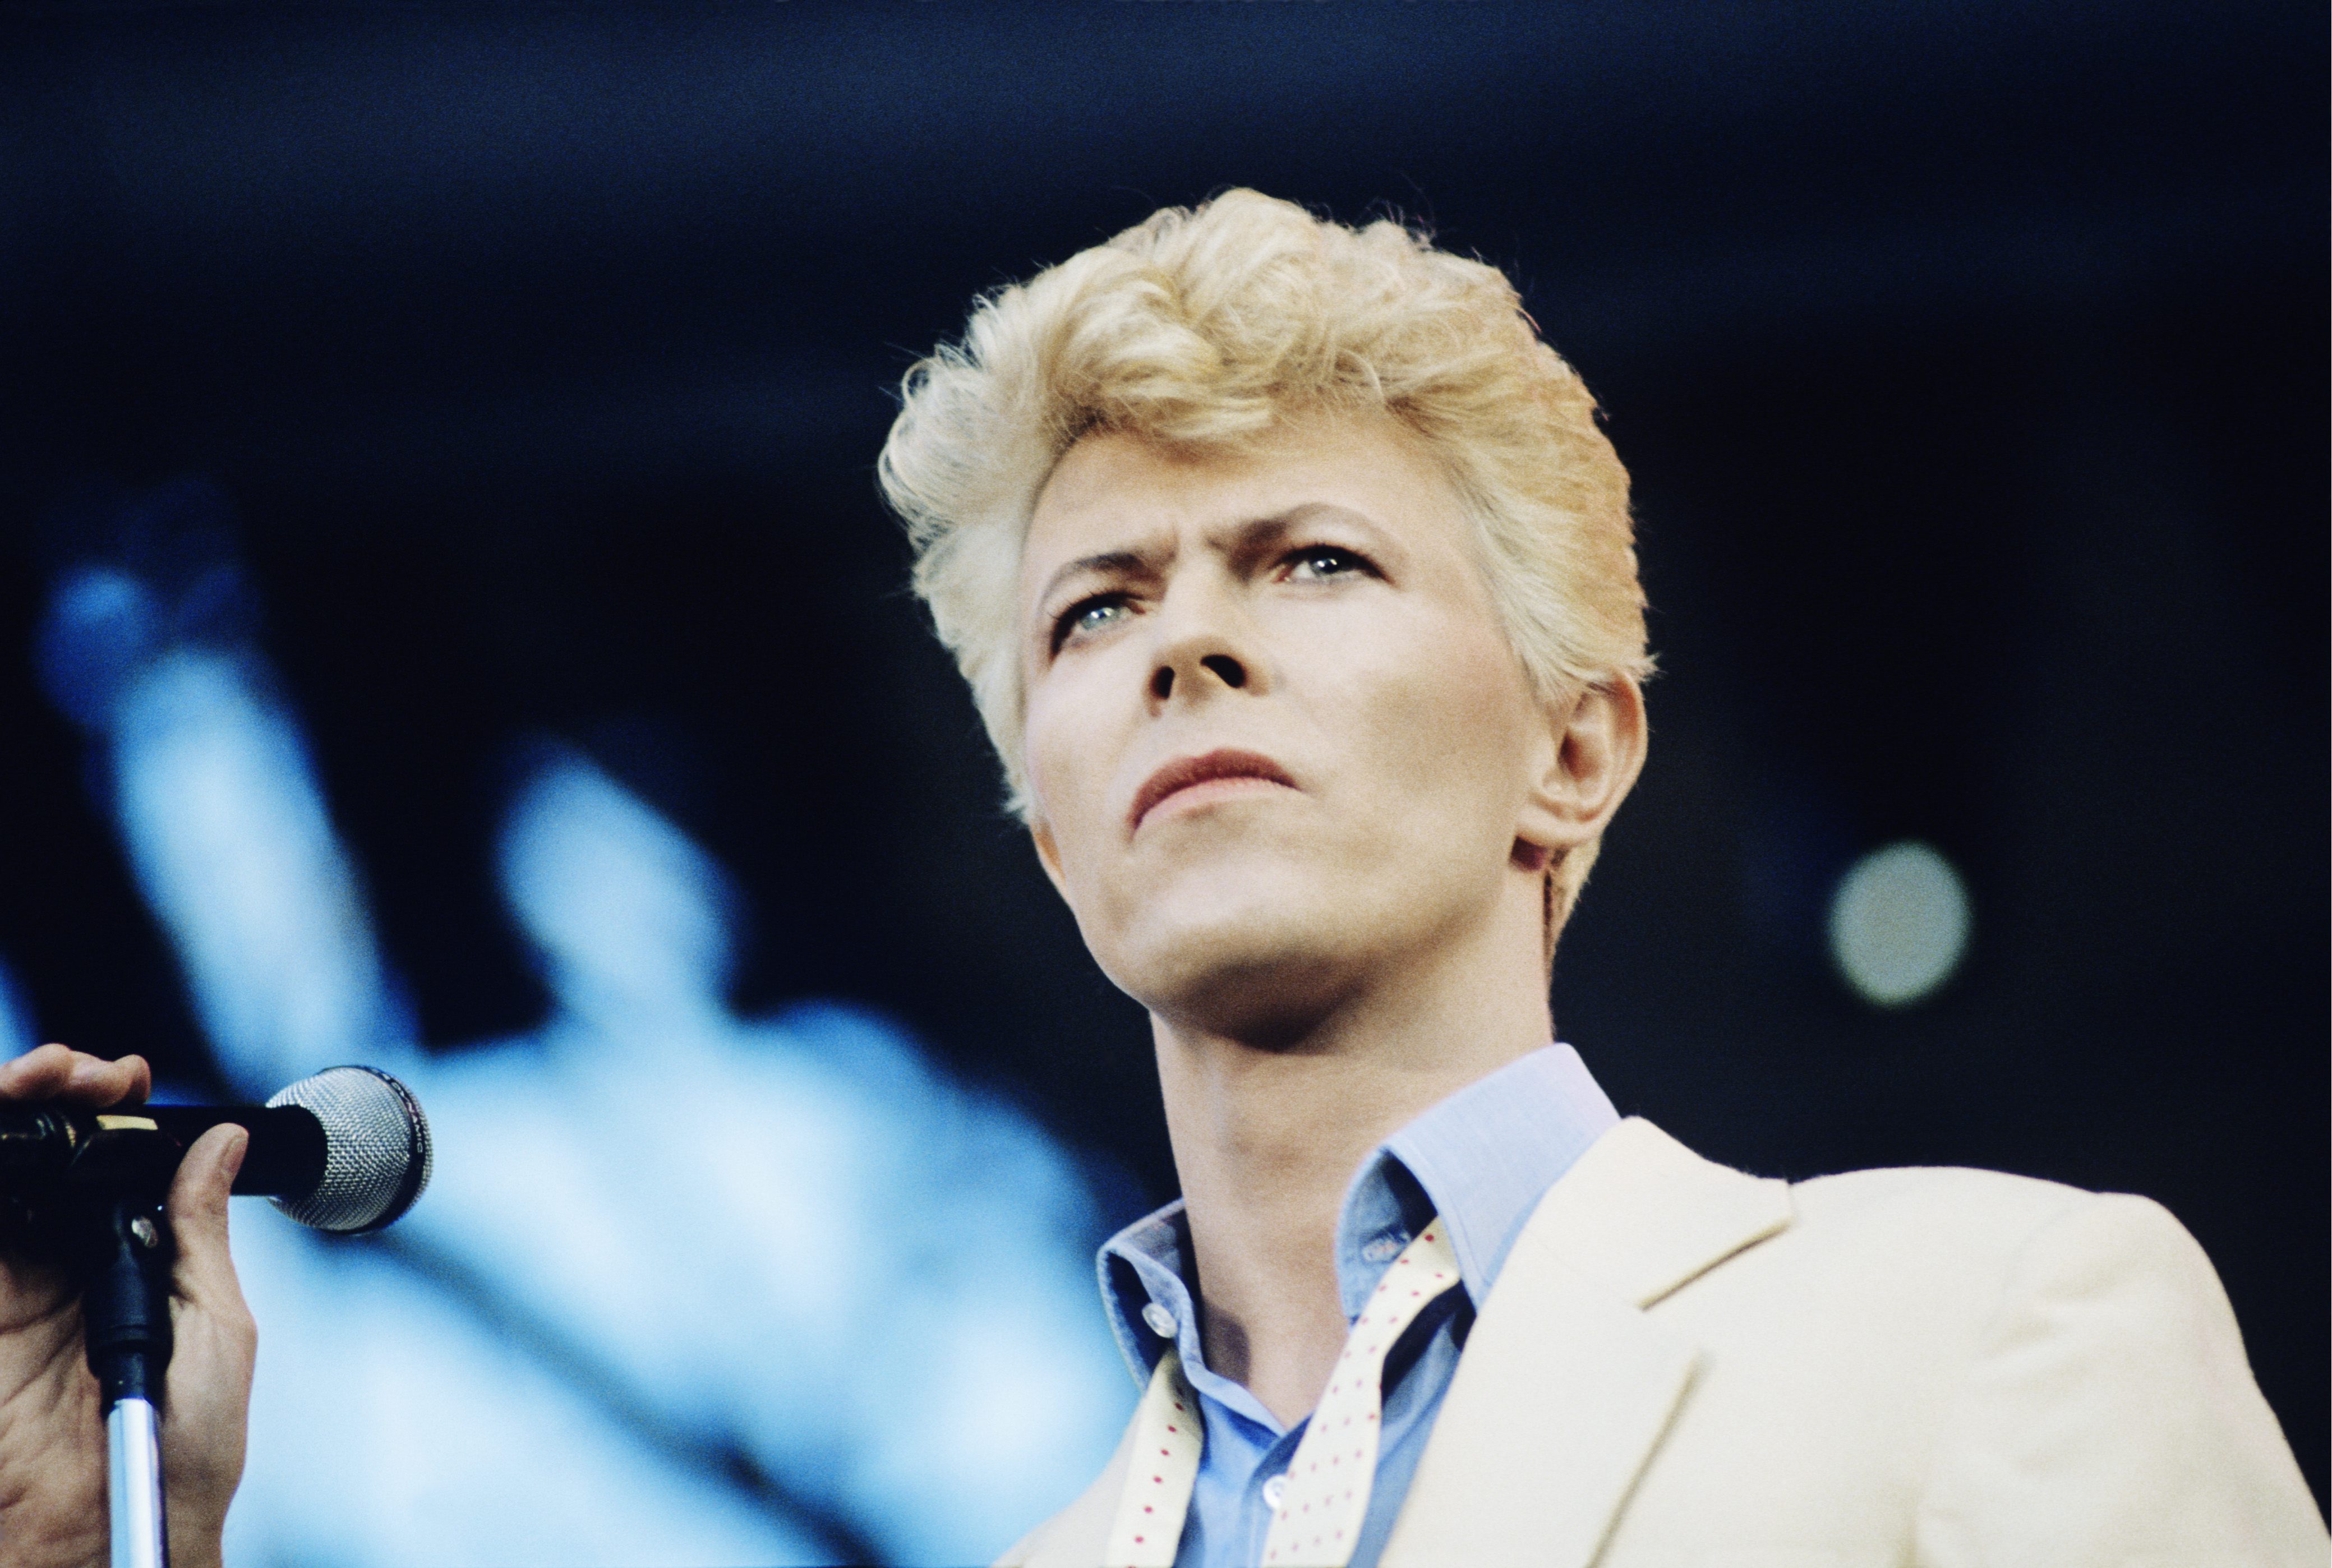 Singer David Bowie, subject of the Moonage Daydream documentary, performs The Serious Moonlight show